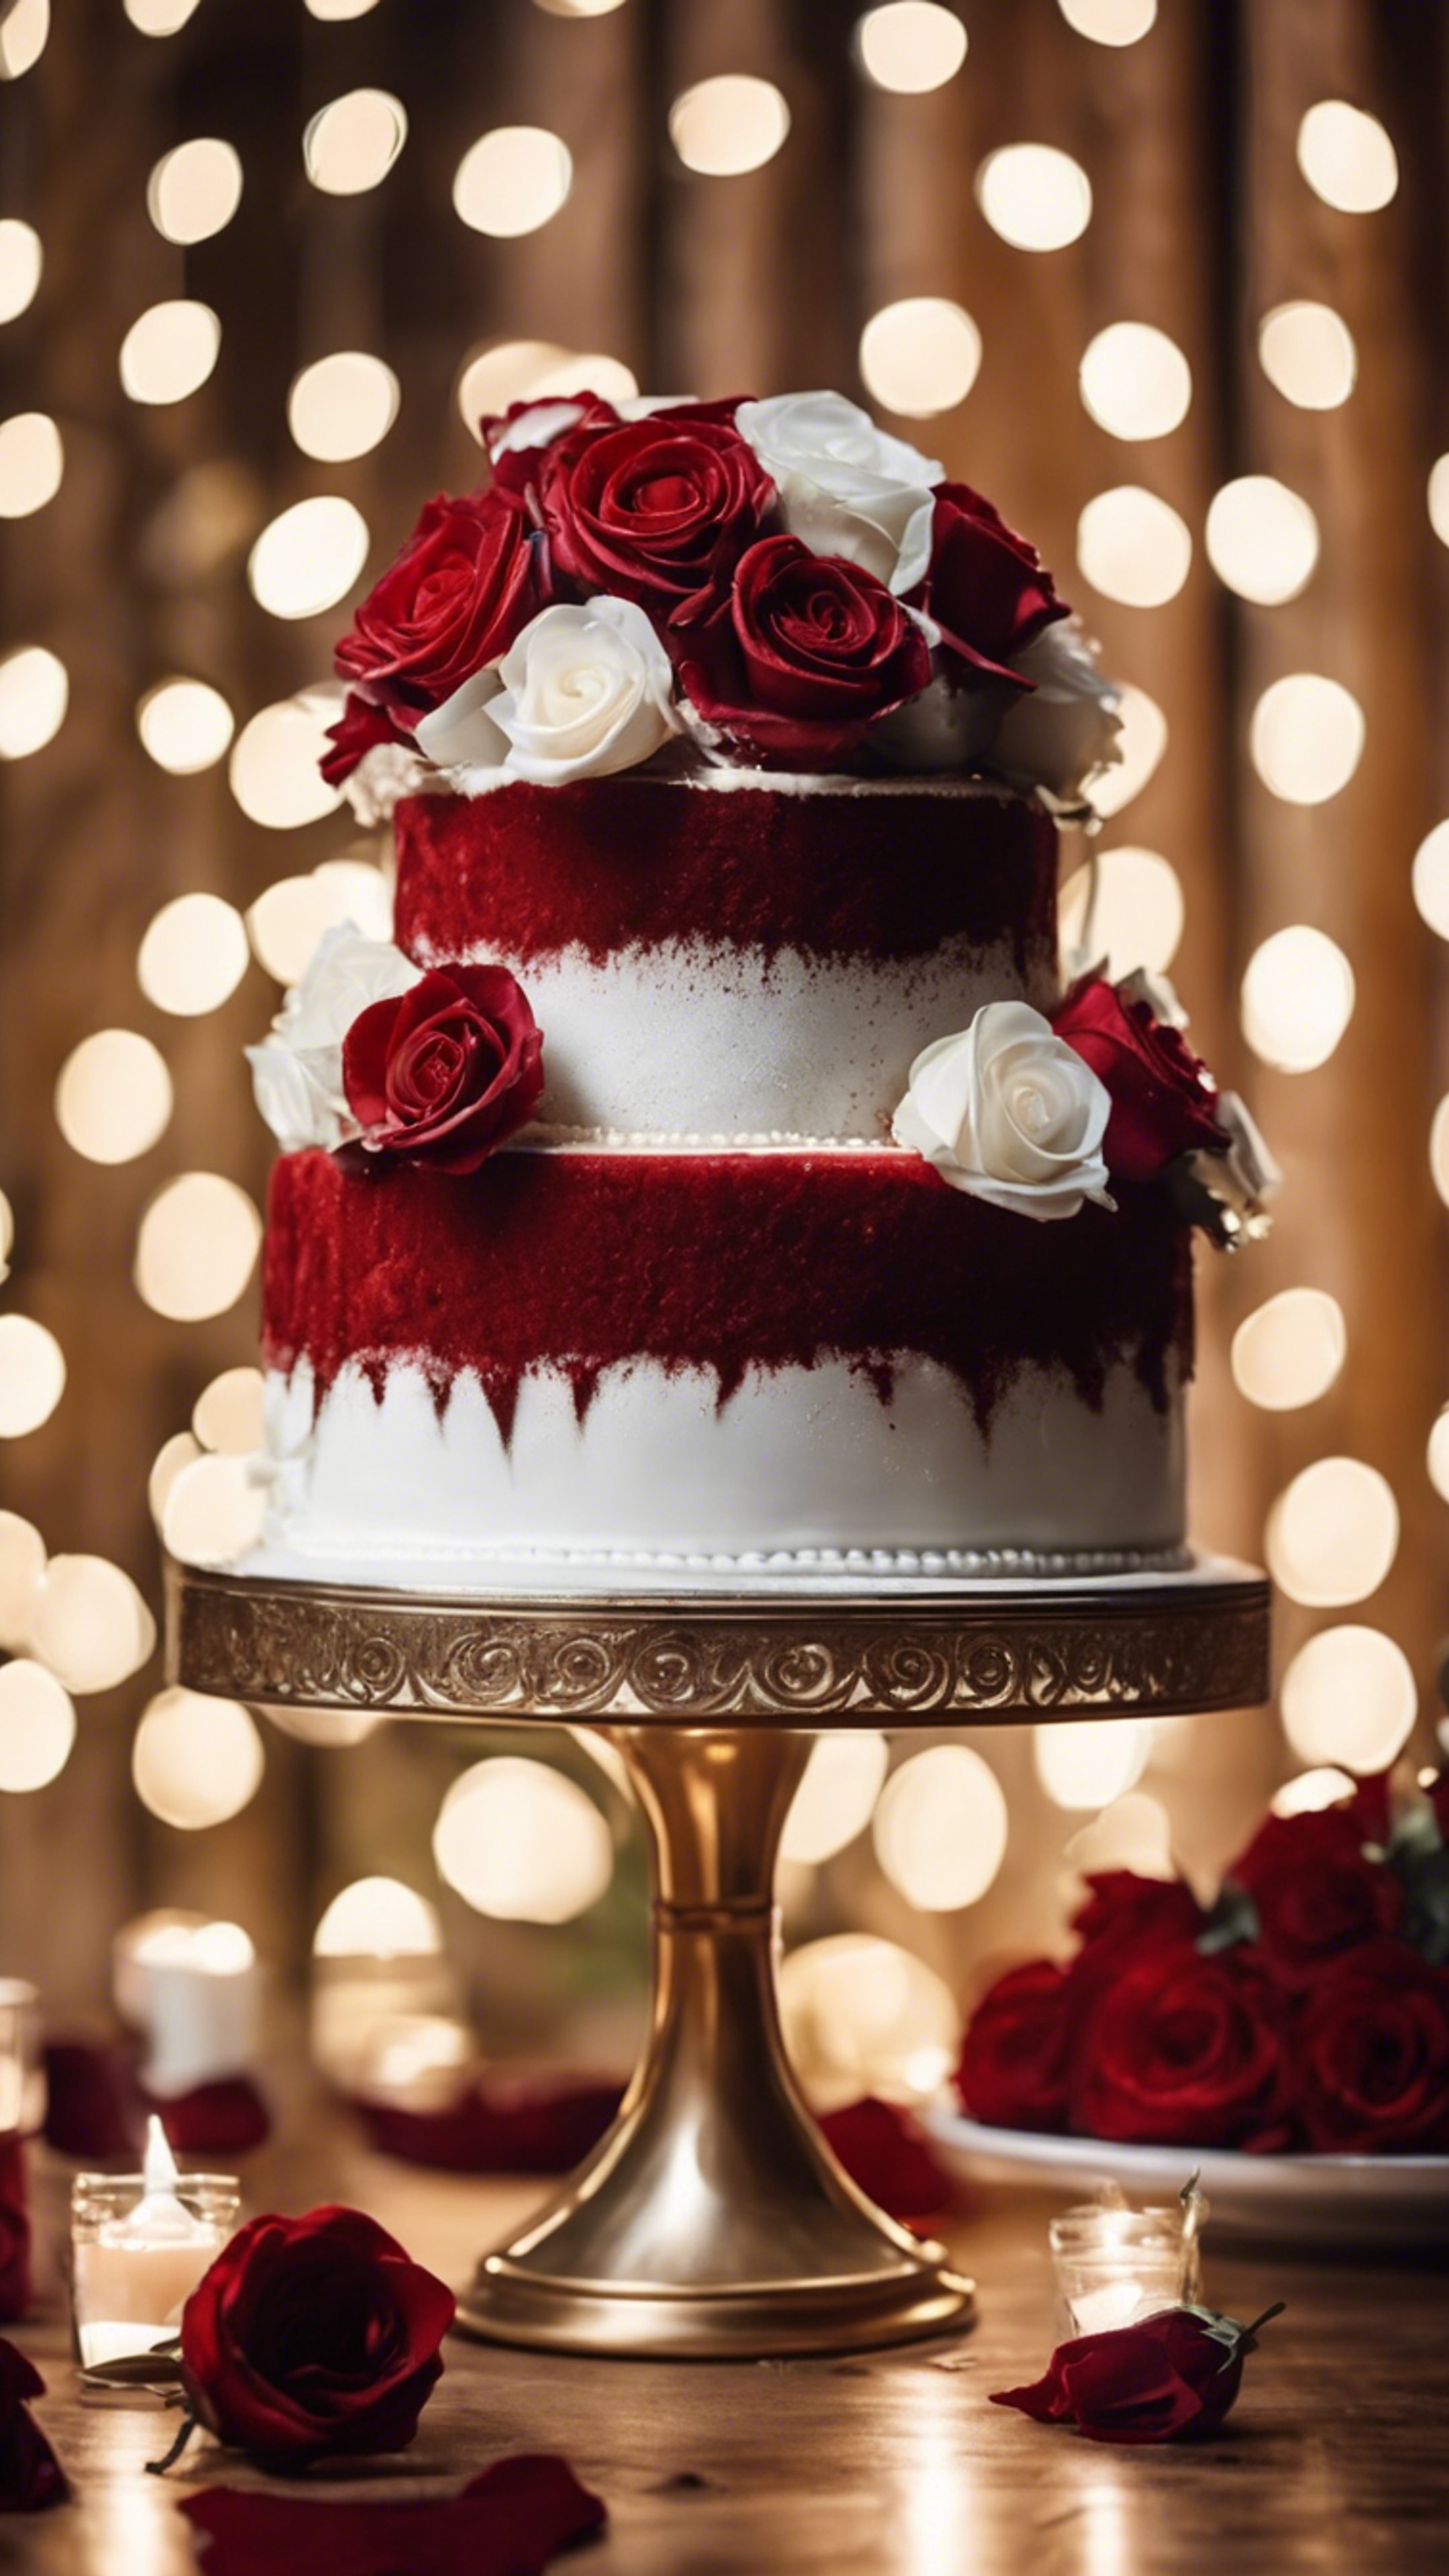 Three-tiered red velvet wedding cake adorned with white roses, against a backdrop of twinkling fairy lights. Fond d'écran[b48557e9e8f84a90b888]